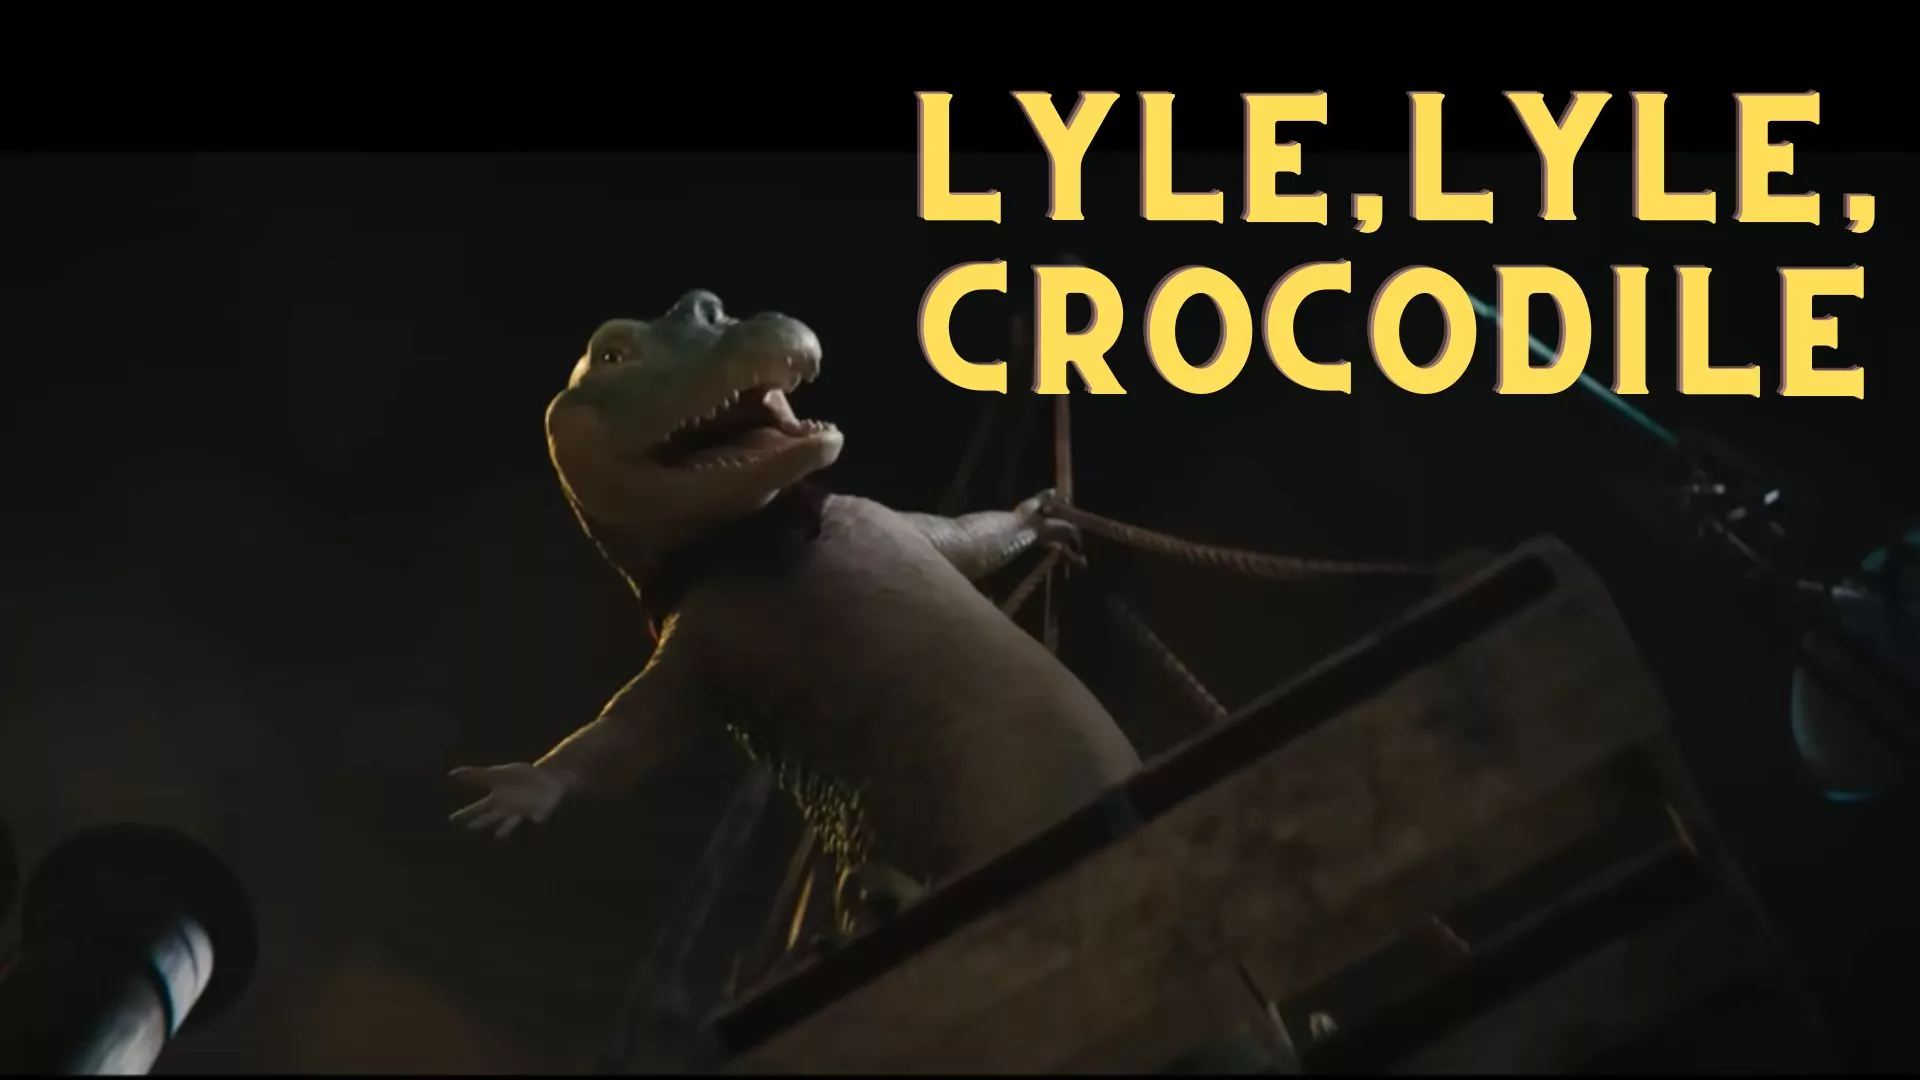 Lyle Lyle Crocodile Parents Guide and Age Rating (2022)